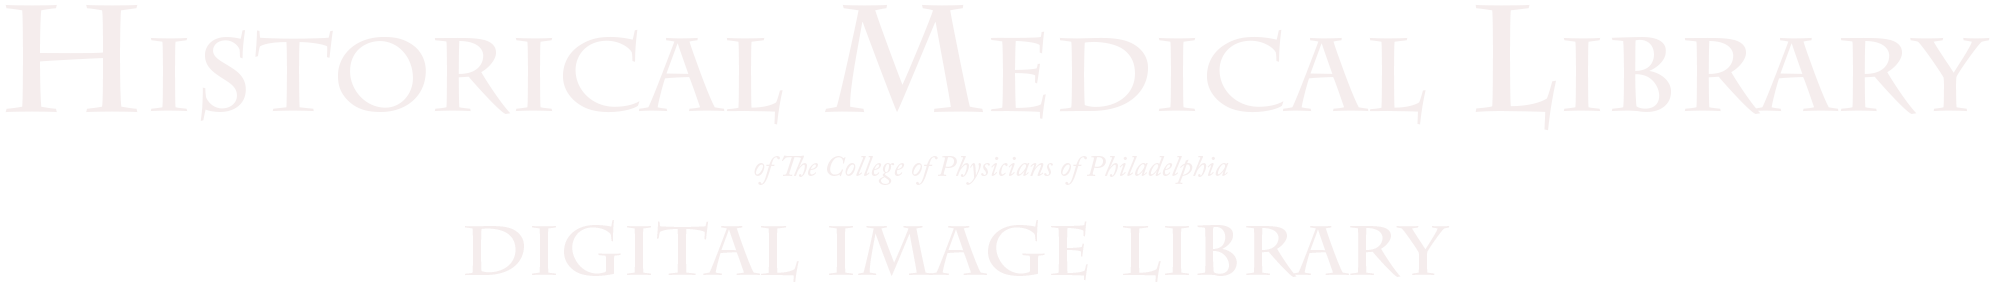 The College of Physicians of Philadelphia Digital Library